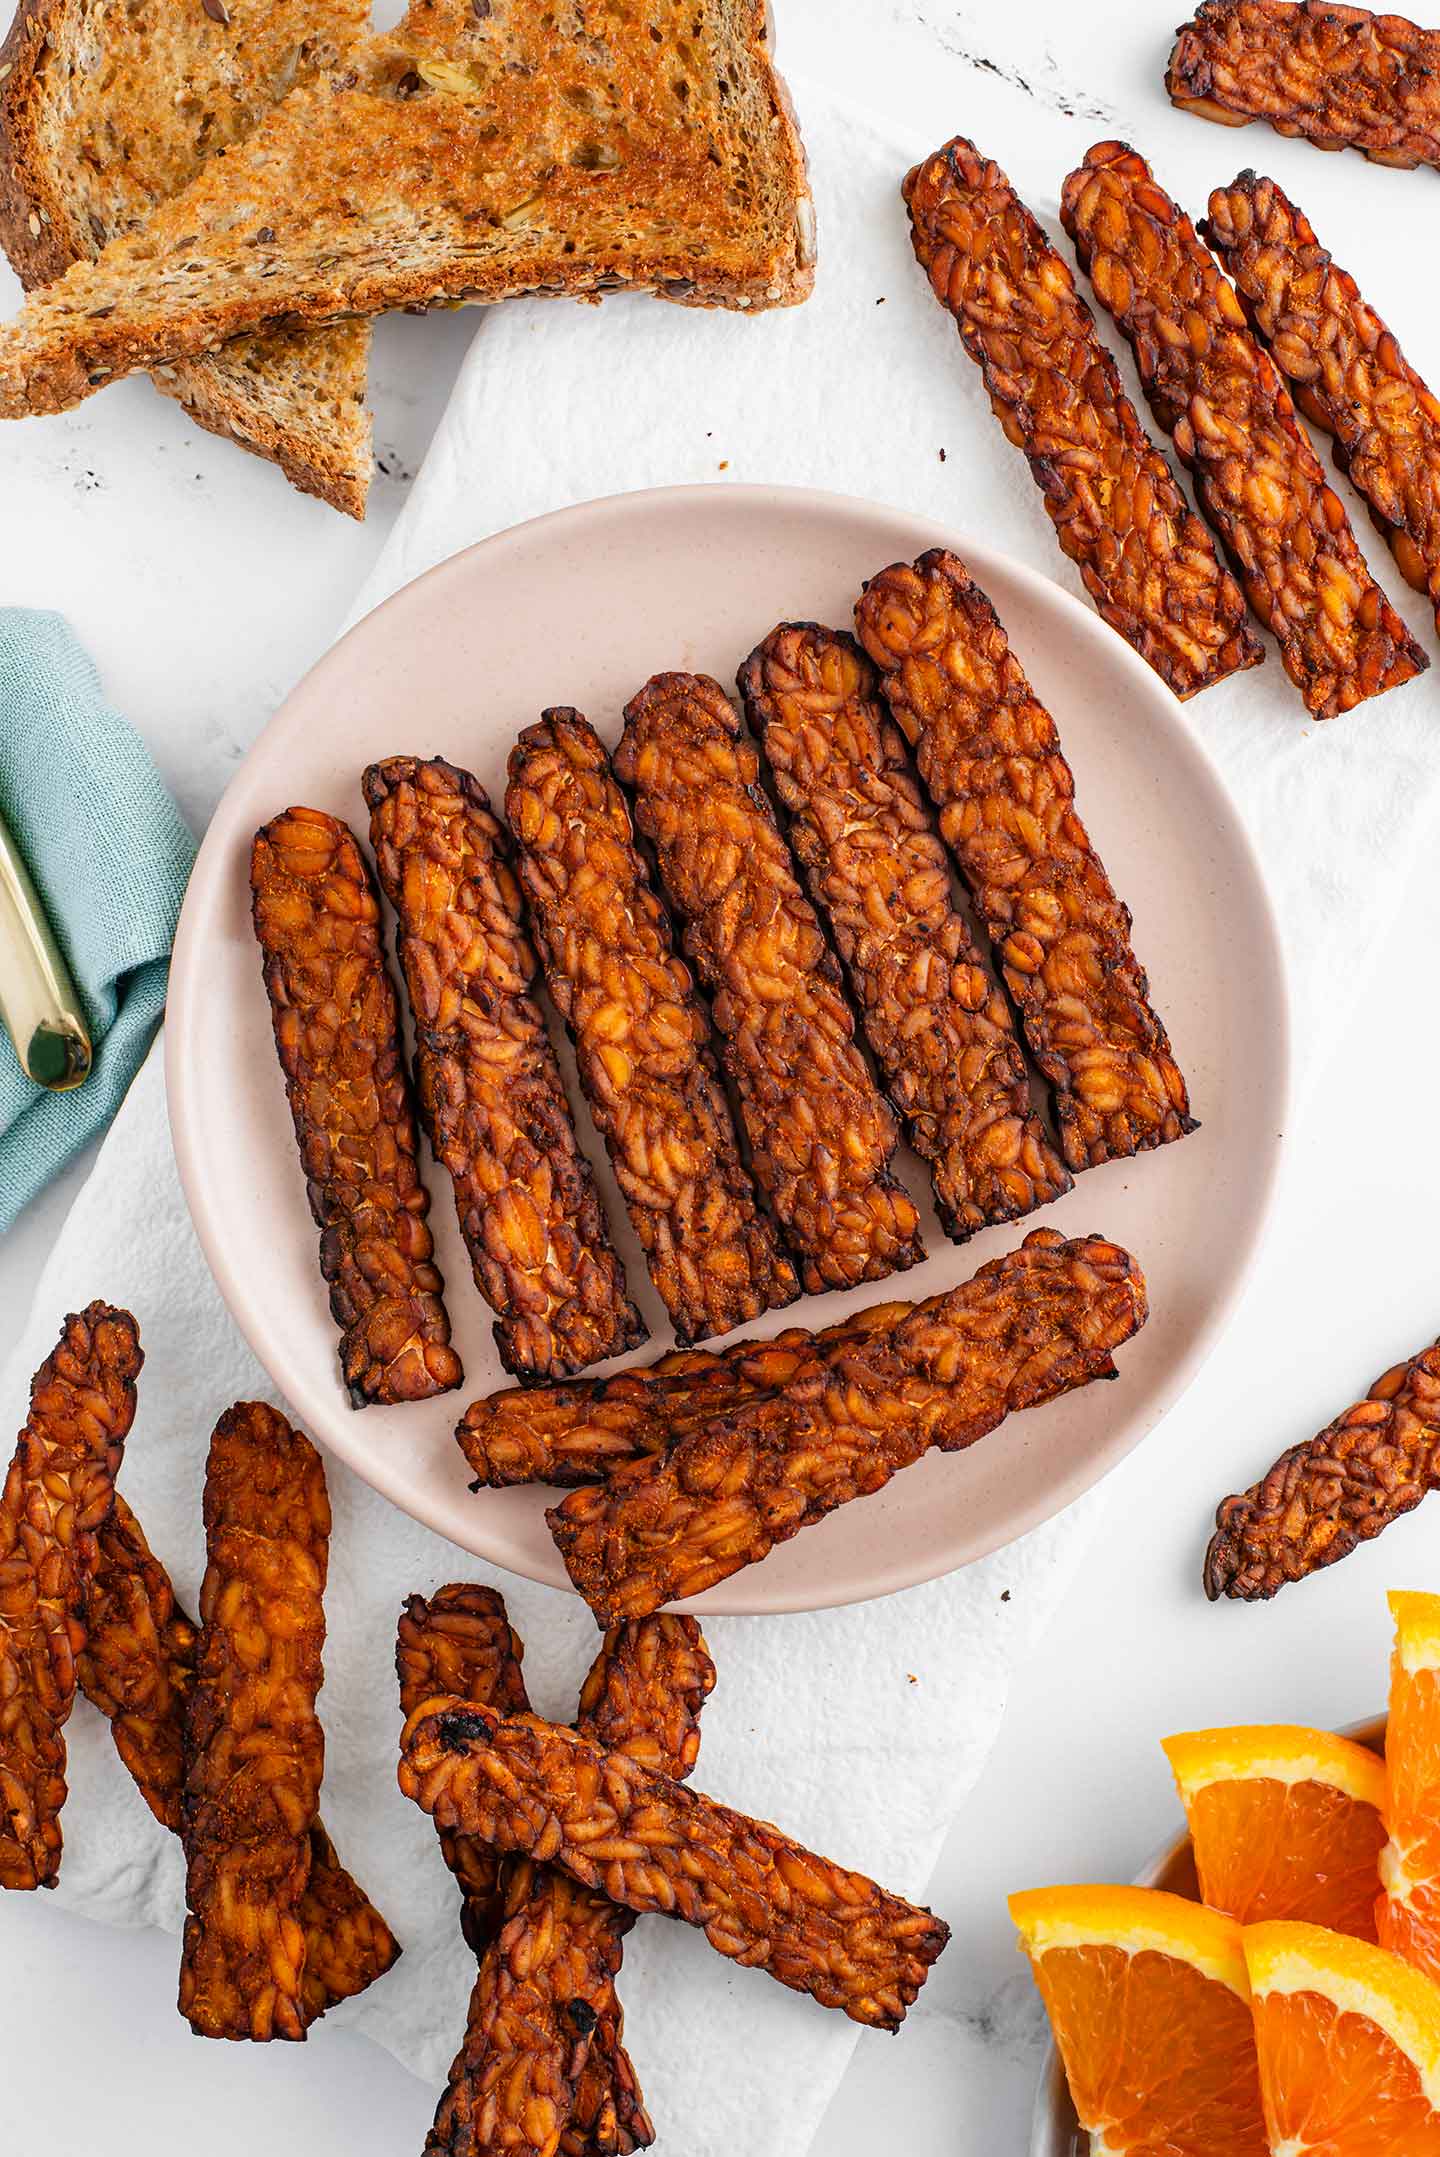 Slices of crispy tempeh bacon fill a plate. The tempeh is dark brown with charred edges. More bacon surrounds along with toast and orange slices. 